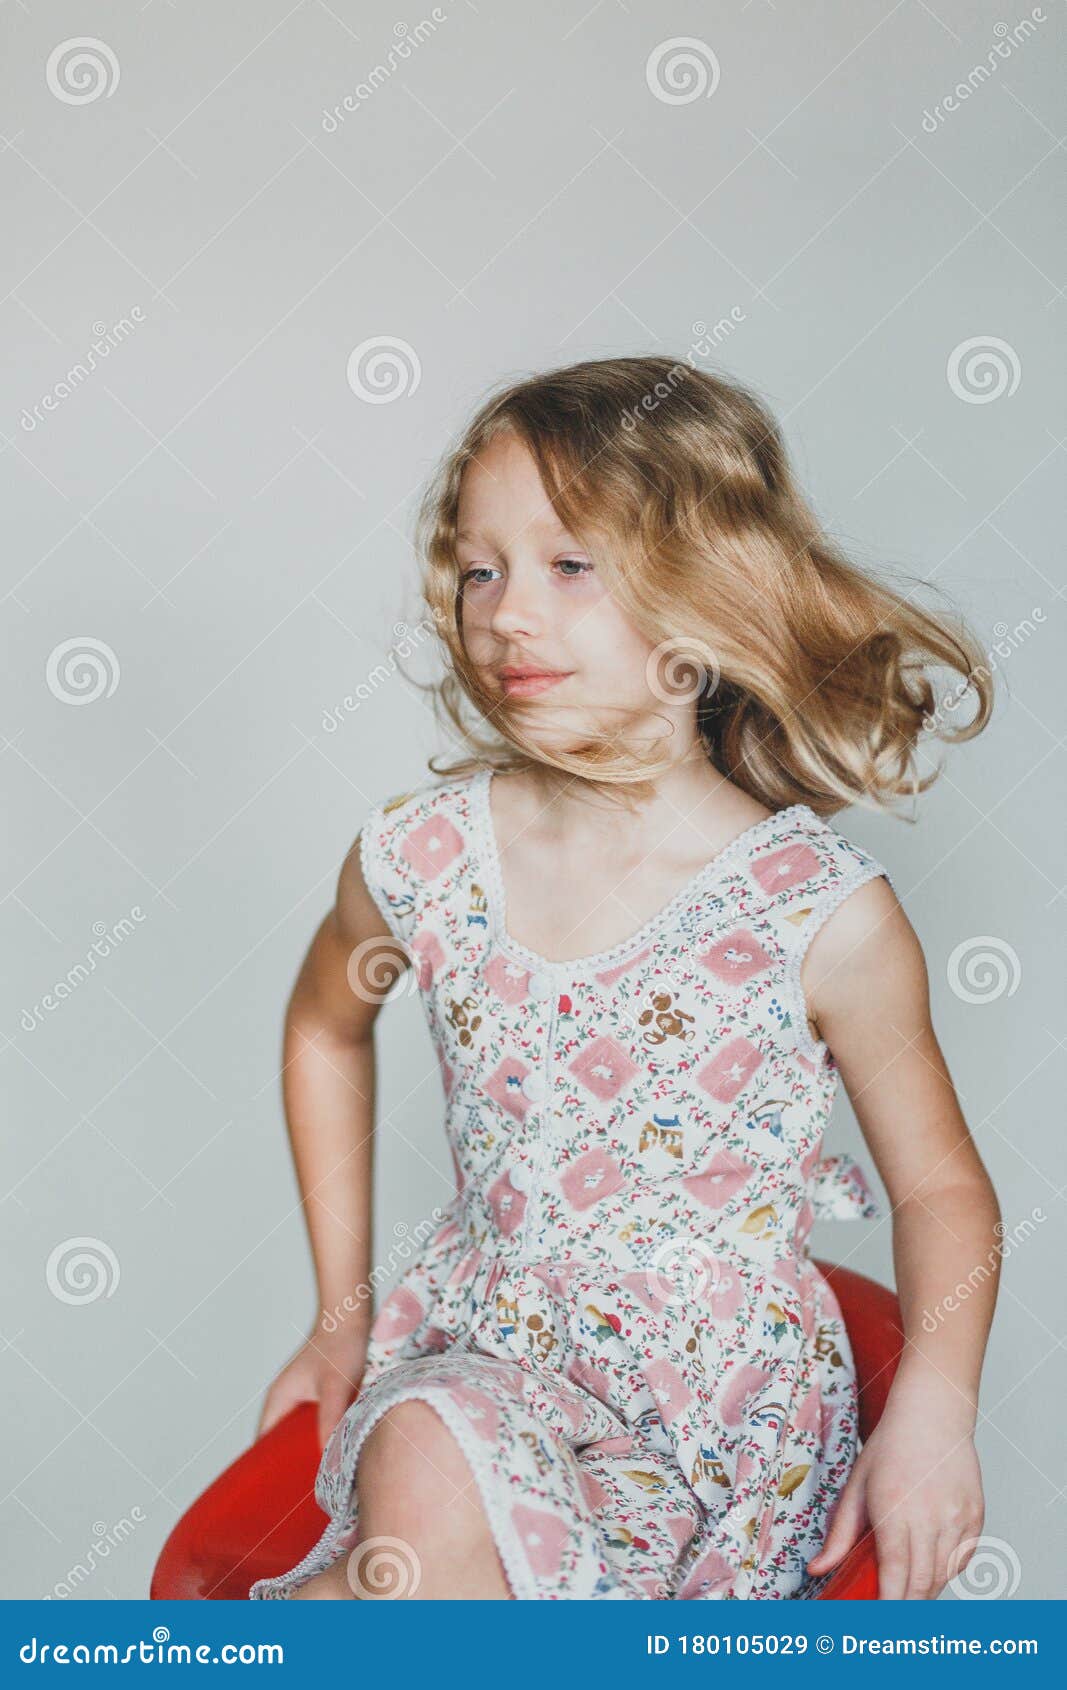 Cute European Teen Girl on a Gray Background Sitting on a Red Chair ...